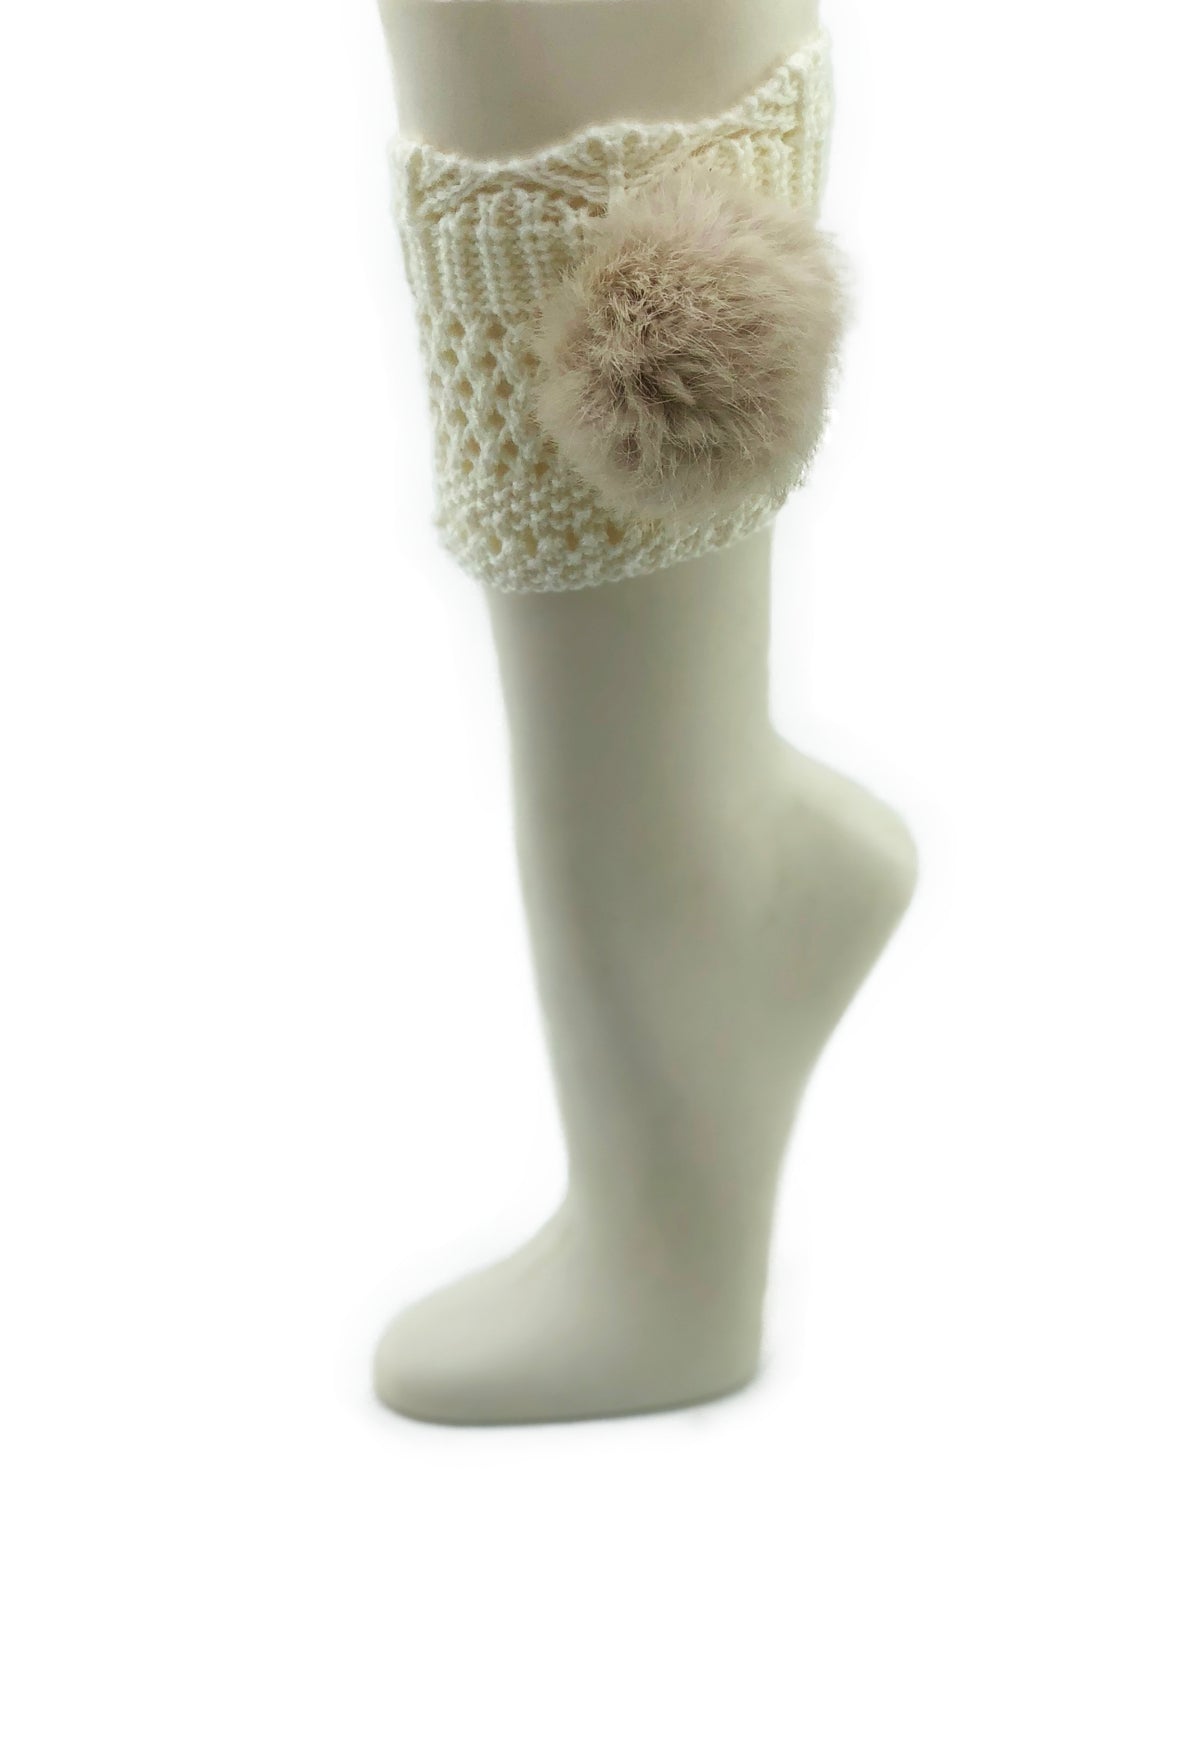 Off-White Leg Warmer/Boot Cover with Rex Rabbit Pom - paulamariecollection